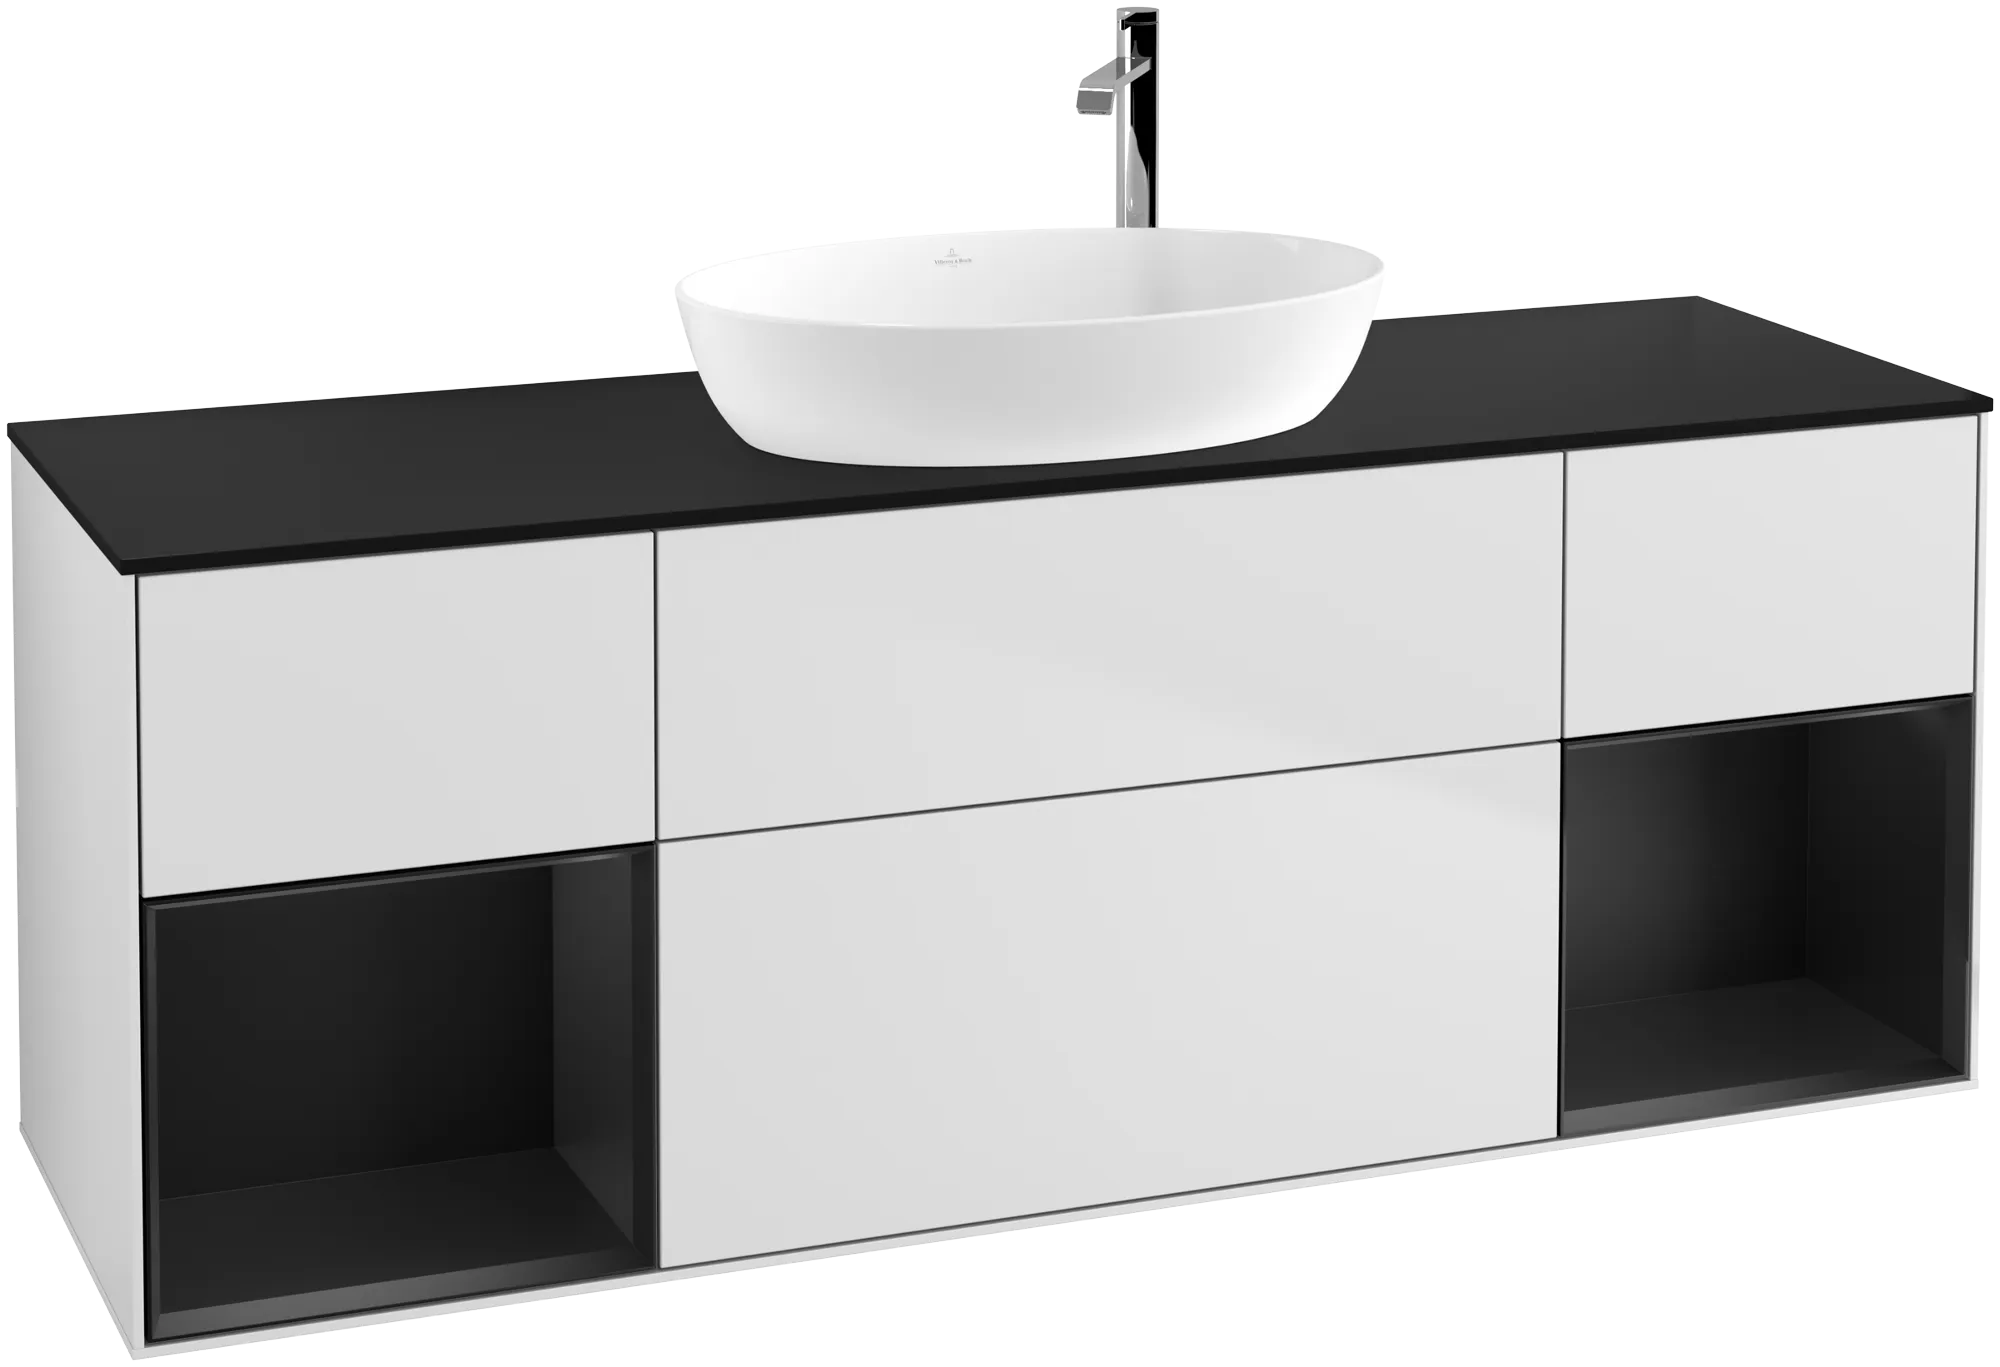 Picture of VILLEROY BOCH Finion Vanity unit, with lighting, 4 pull-out compartments, 1600 x 603 x 501 mm, White Matt Lacquer / Black Matt Lacquer / Glass Black Matt #G982PDMT